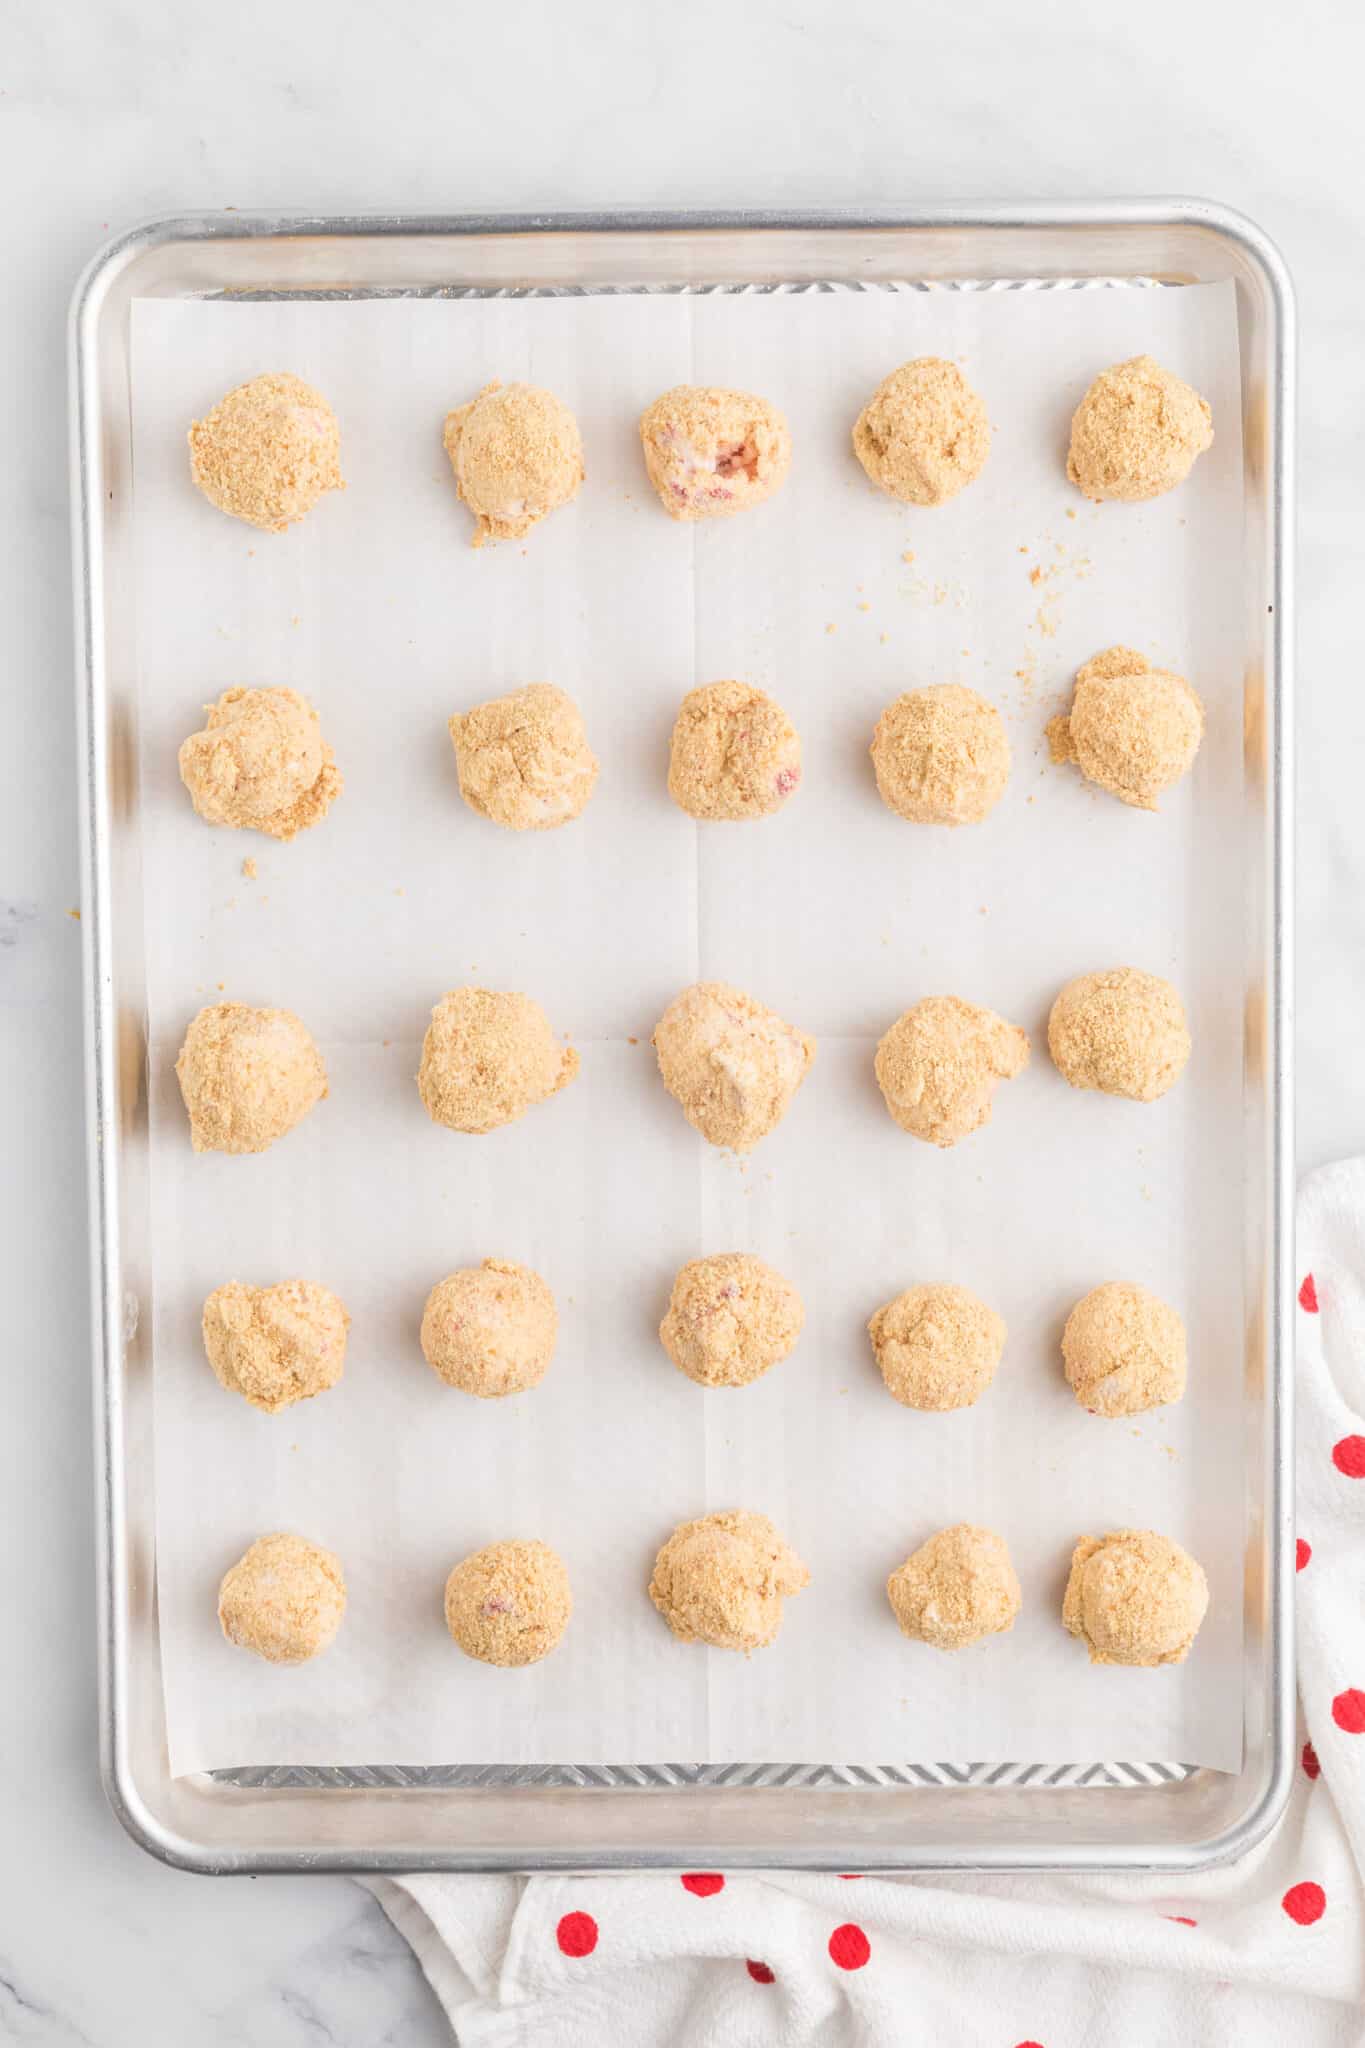 The balls rolled in graham crackers.